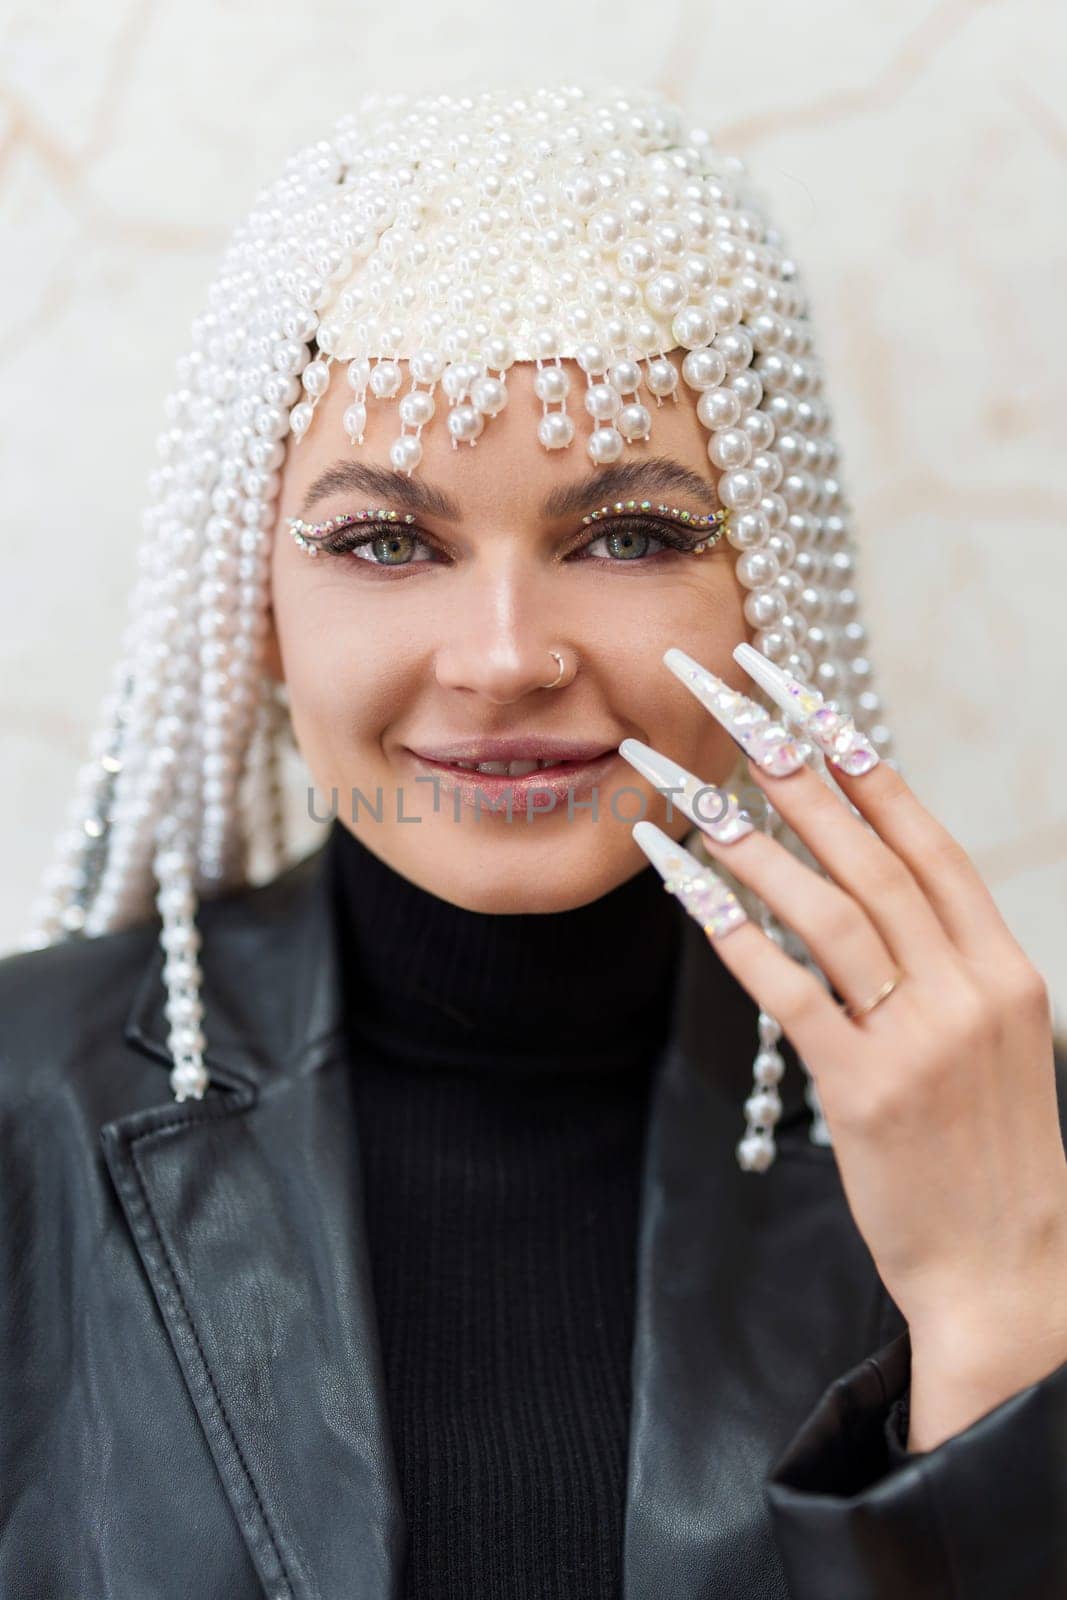 Vertical close up portrait of an artist with a wig of pearls, glitter and fake nails